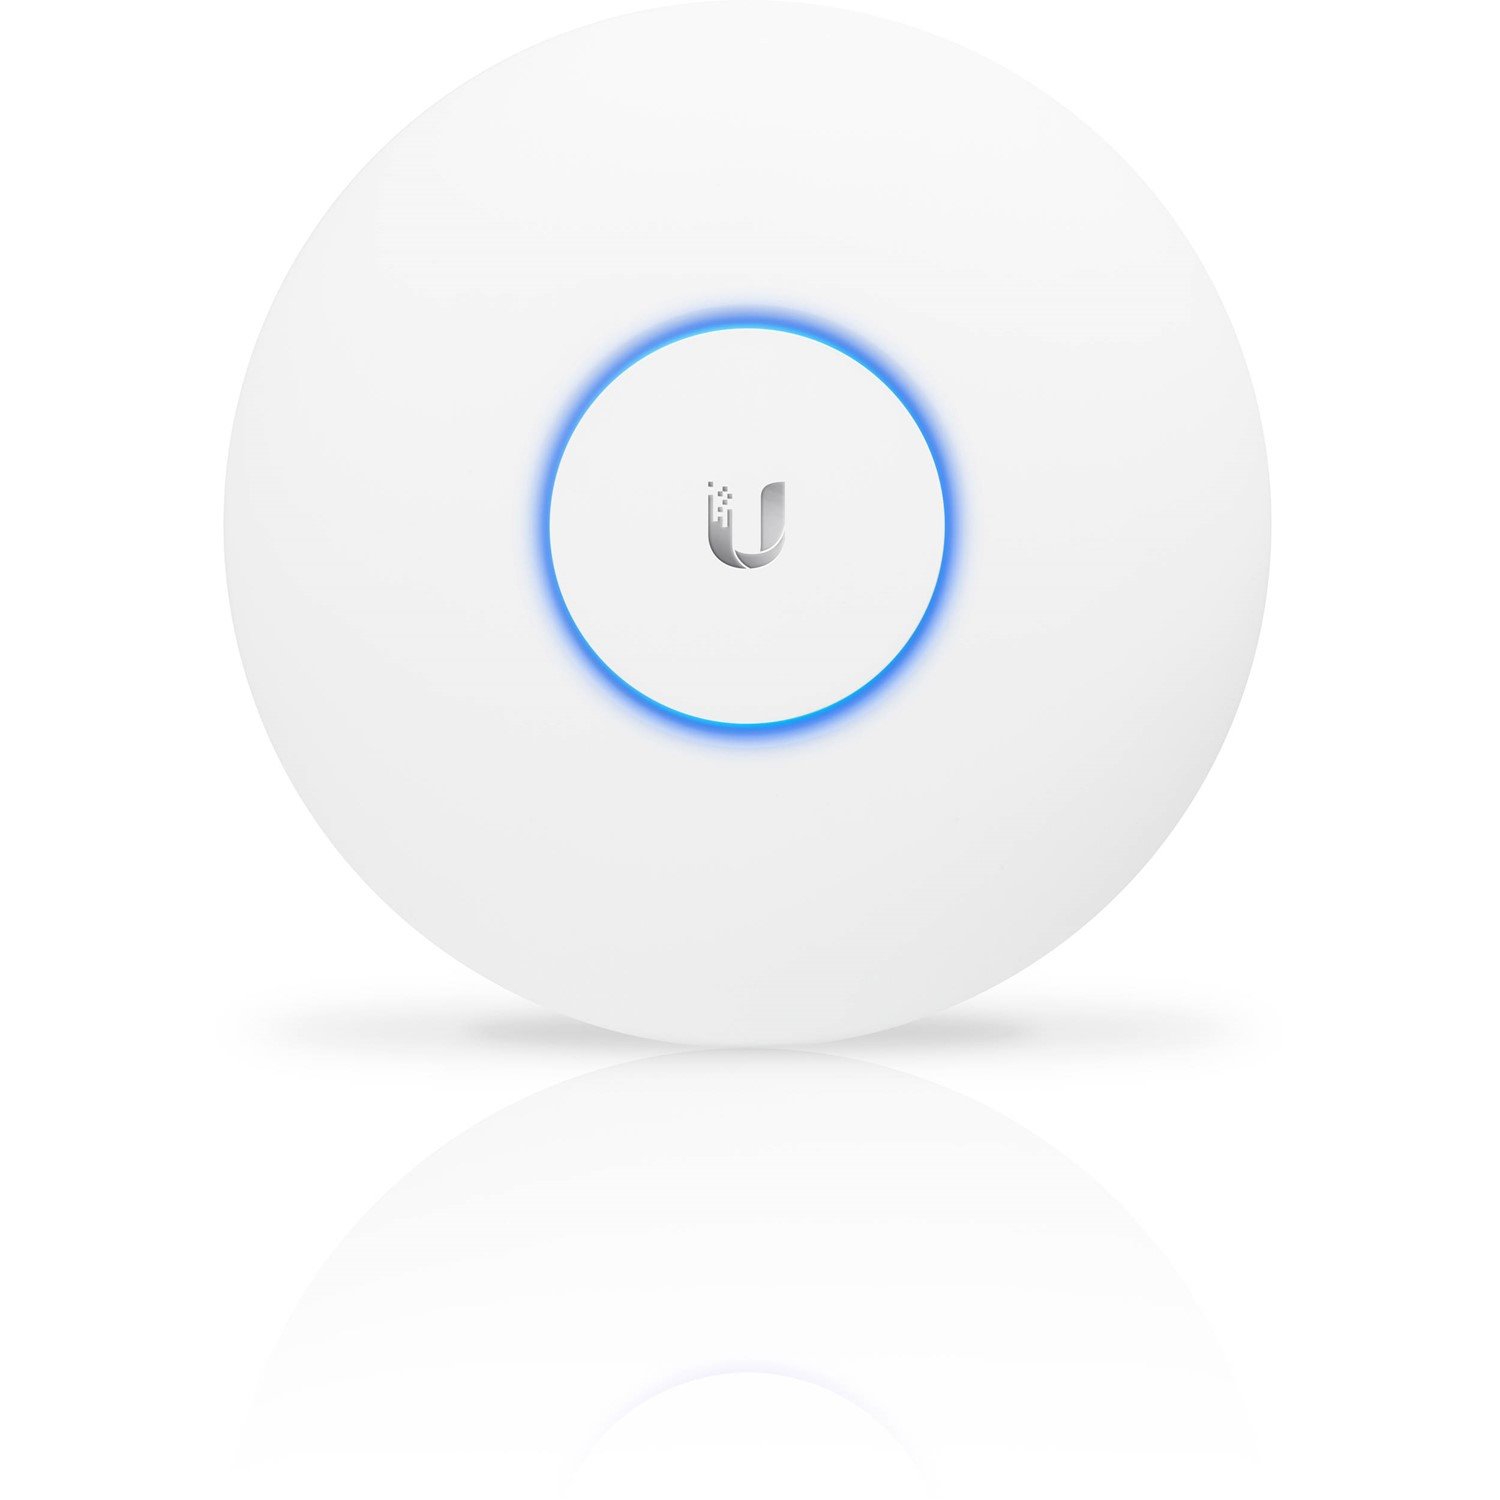 Ubiquiti UniFi Ap Ac Pro 802.11Ac Dual Radio Indoor/Outdoor Access Point - Range To 122M With 1300Mbps Throughput